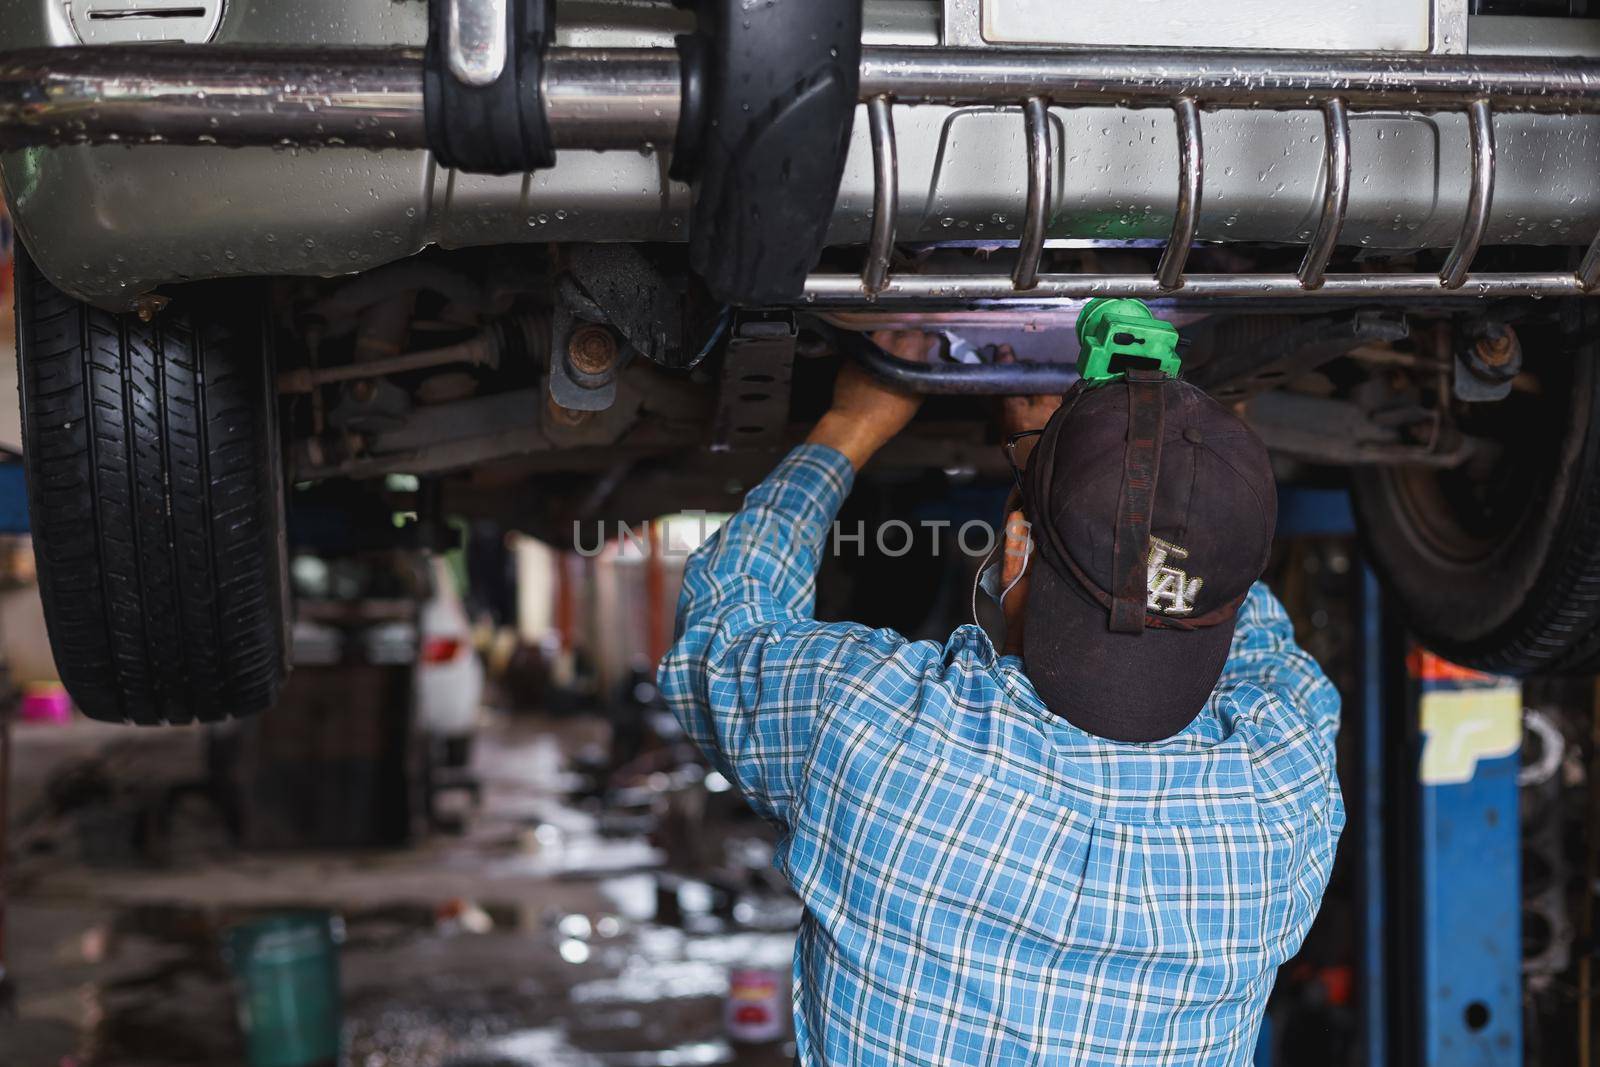 The mechanic is checking the undercarriage of the car.